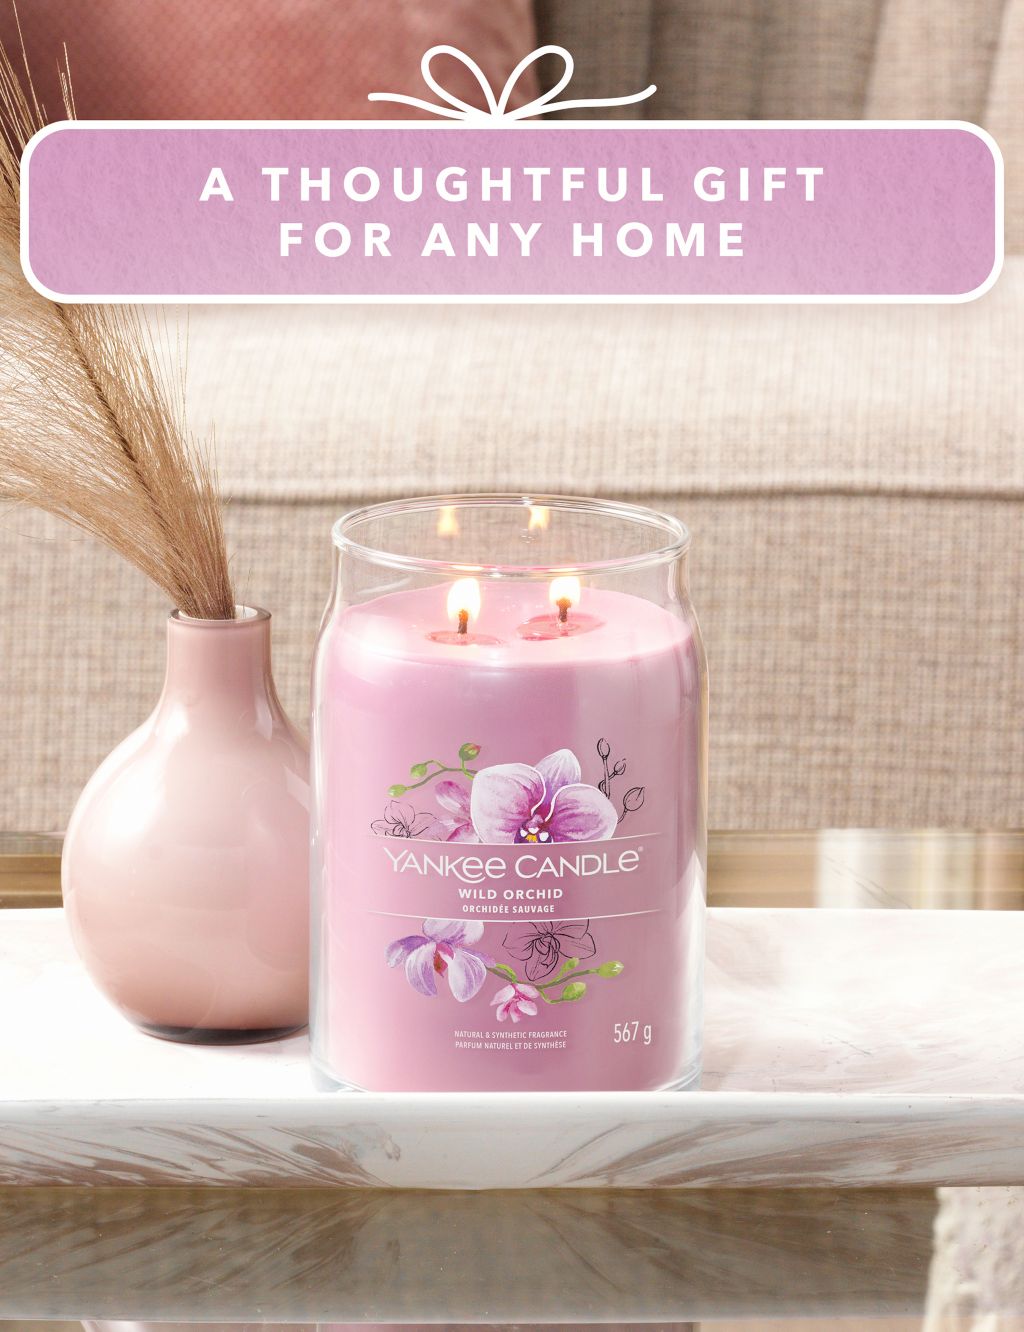 Wild Orchid Signature Large Jar Scented Candle image 6